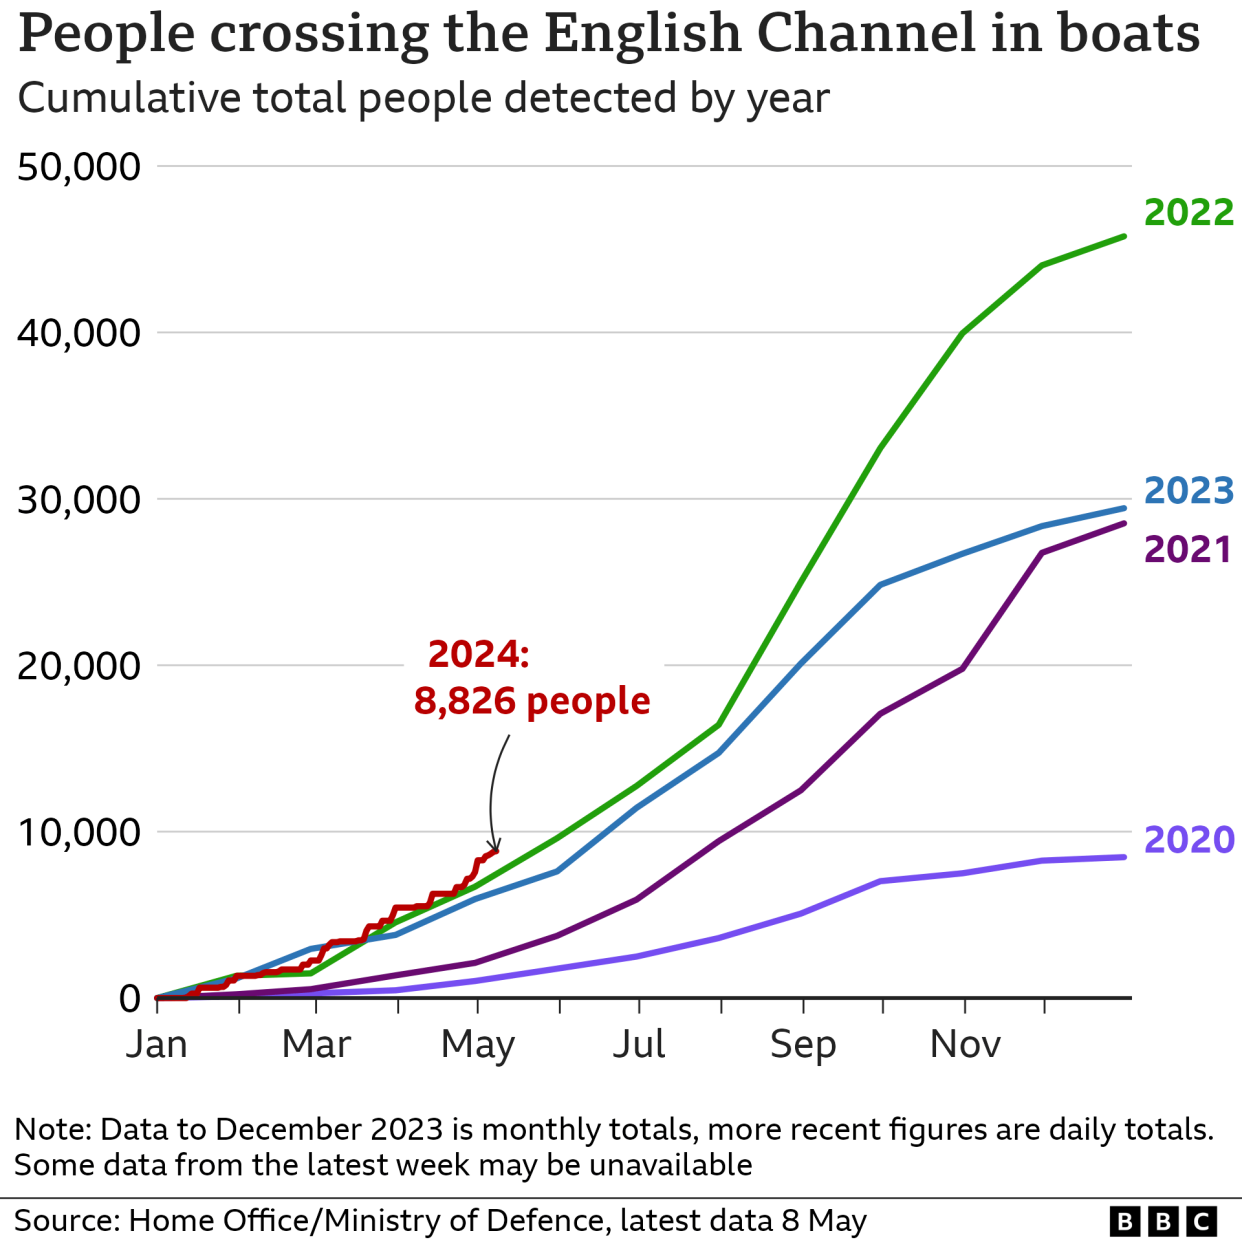 More than 8,826 people have crossed the English Channel in small boats so far this year, provisional Home Office figures show.